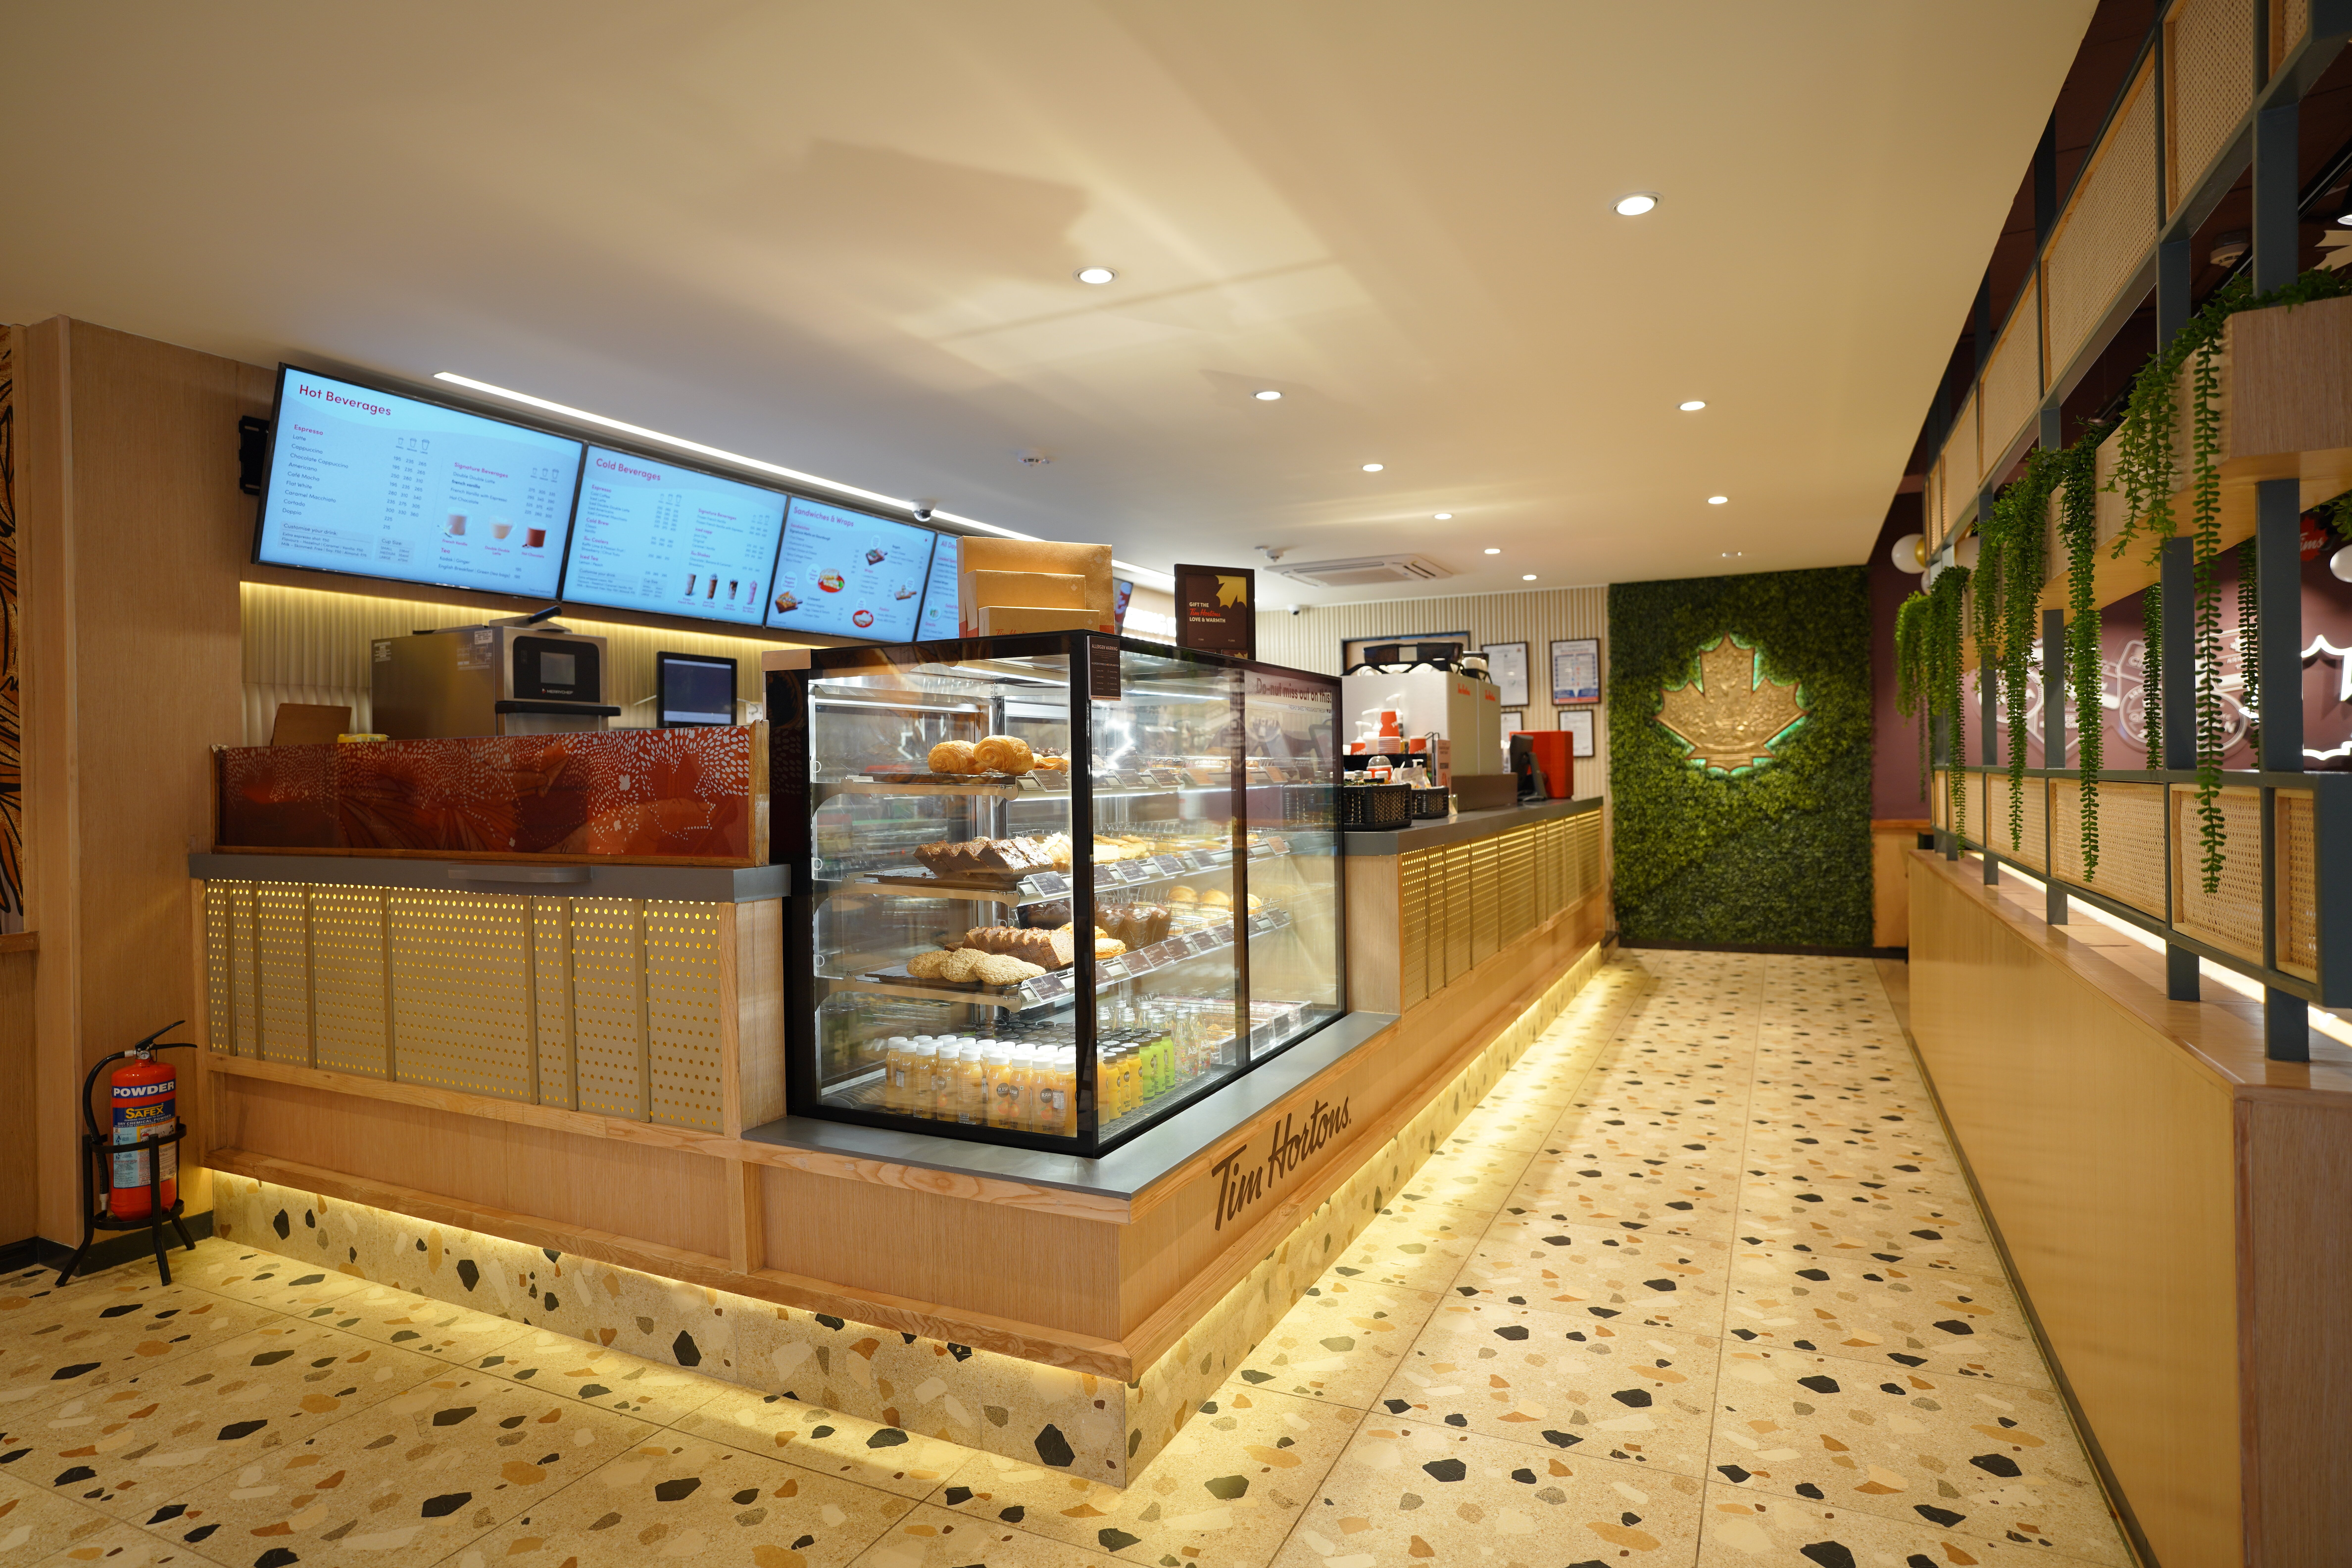 Canadian coffee chain, Tim Hortons, opens in Bengaluru with two outlets  opening consecutively just a